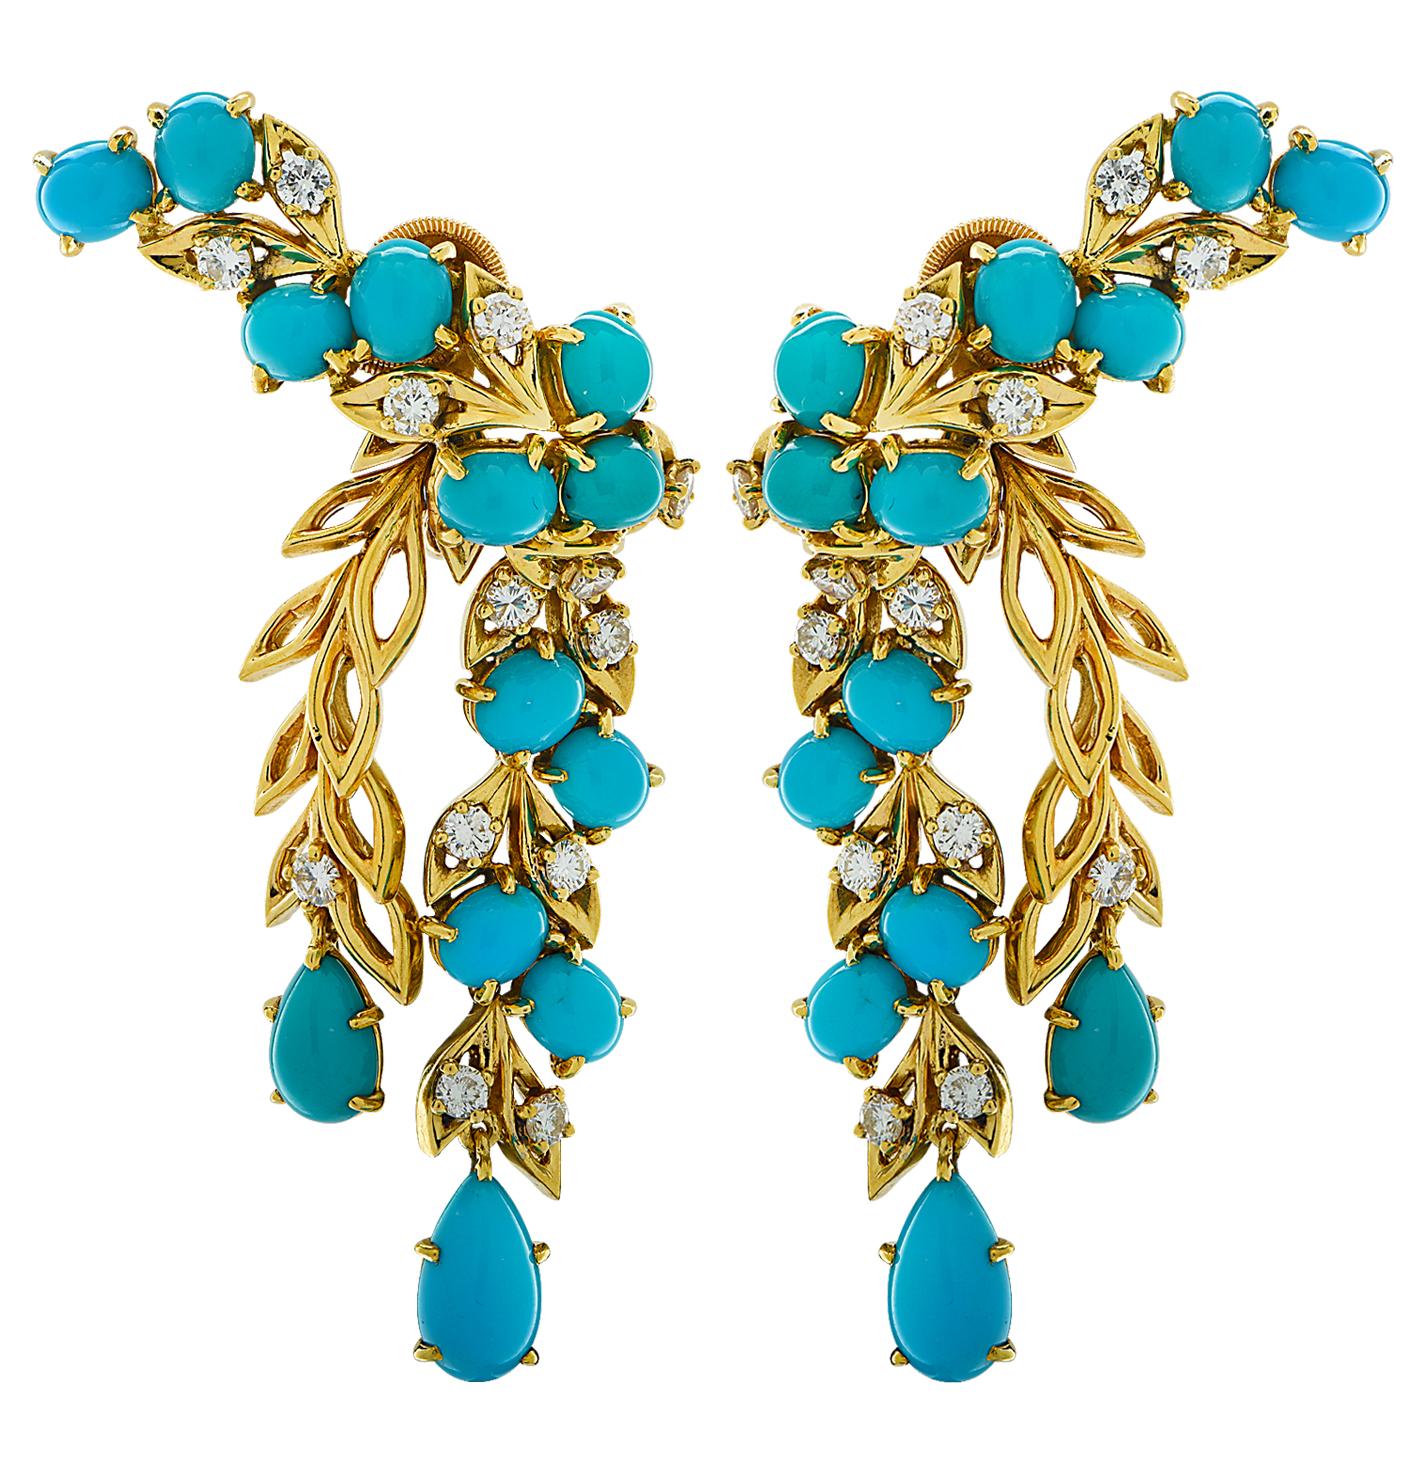 From the House of Cartier, these exquisite French Cartier earrings, circa 1960, crafted in 18 karat yellow gold, feature 26 round brilliant cut diamonds weighing approximately 1.3 carats total, E-F color, VS clarity and 26 Turquoise cabochons. The